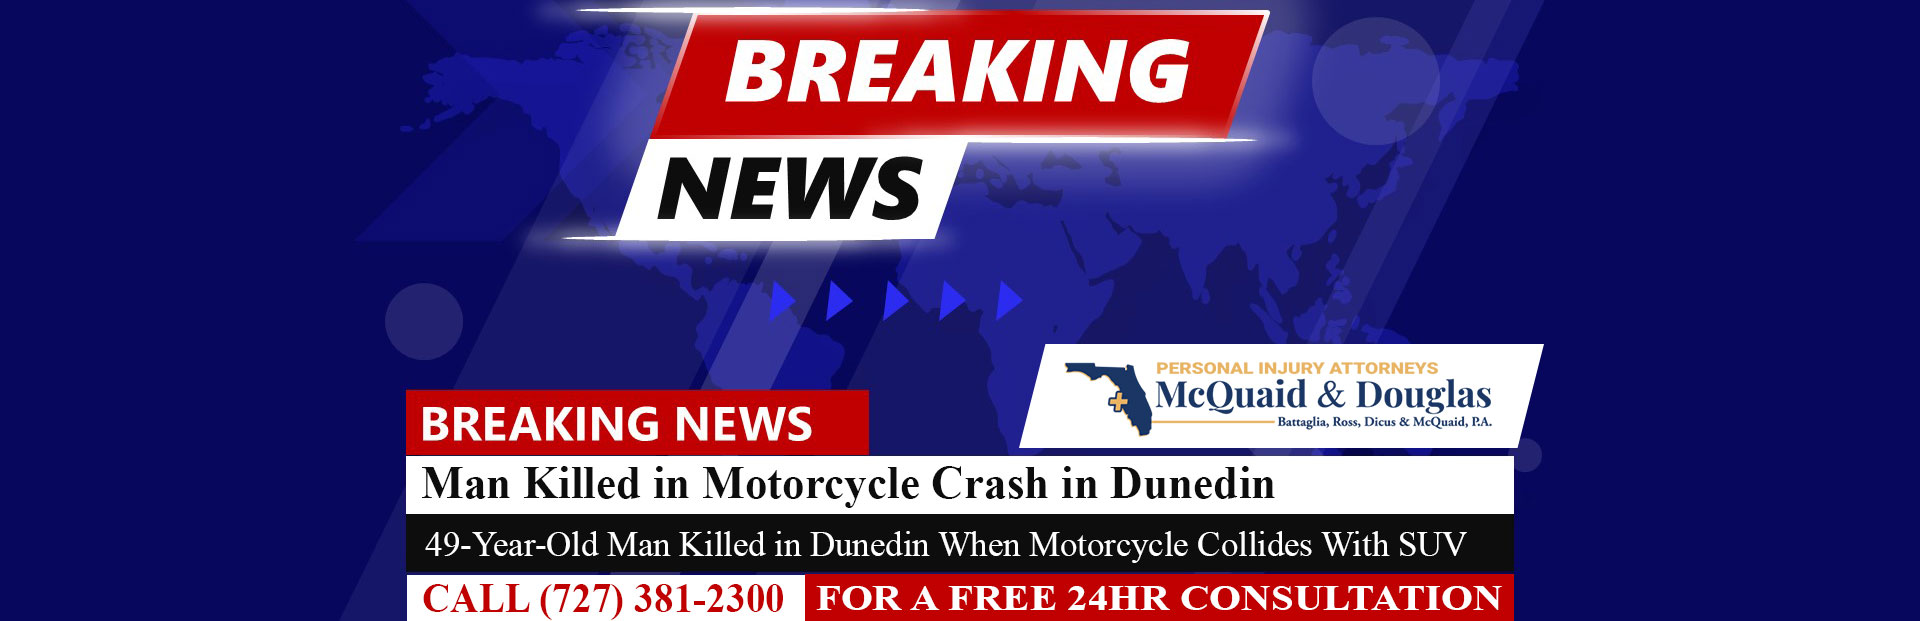 [6-9-22] 49-Year-Old Man Killed in Dunedin When Motorcycle Collides With SUV